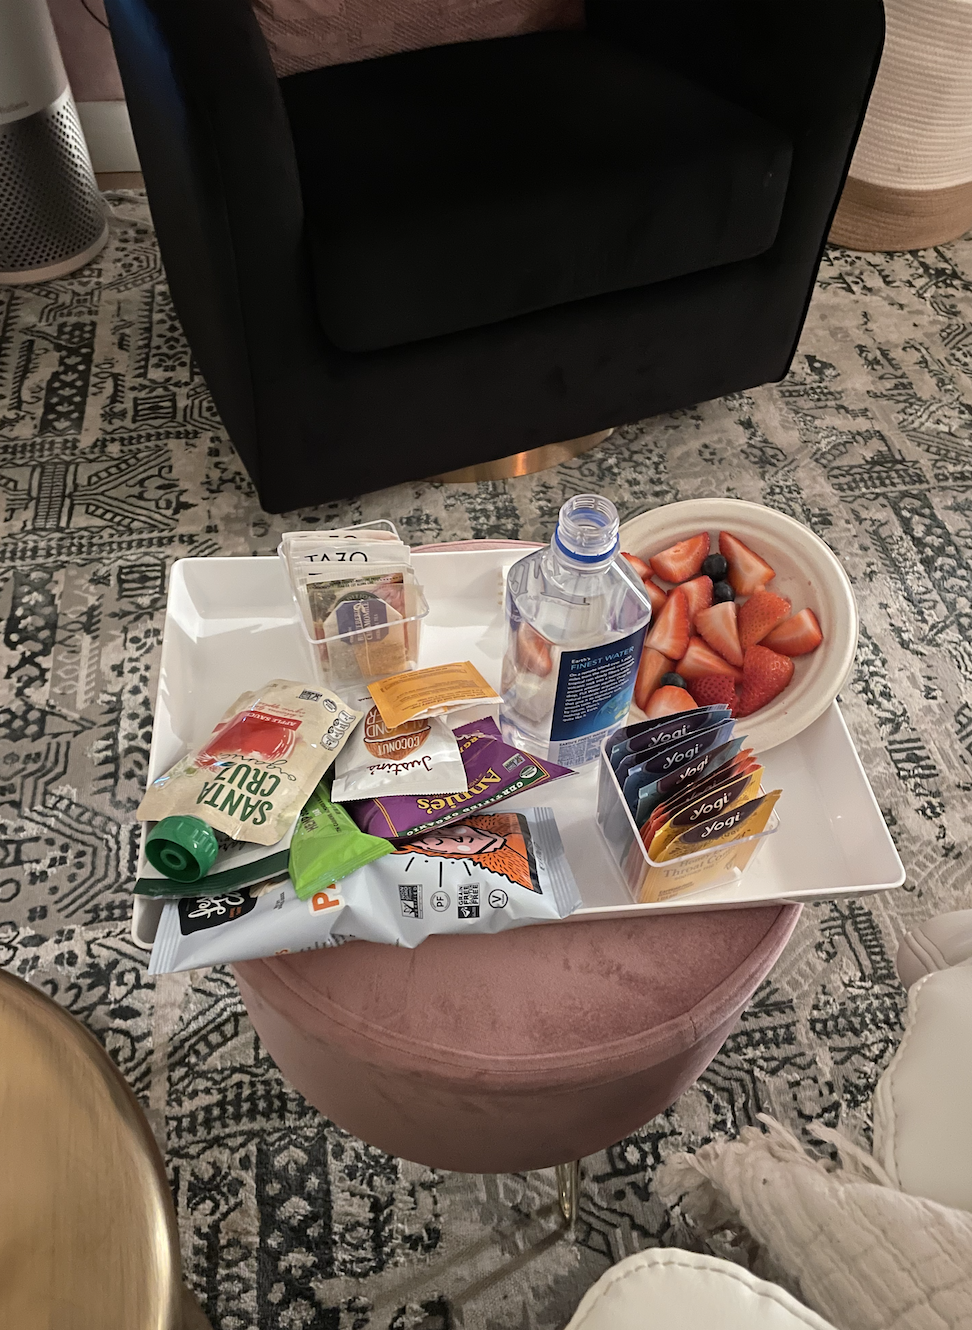 An image from the author of a plate of snacks in the ketamine treatment room